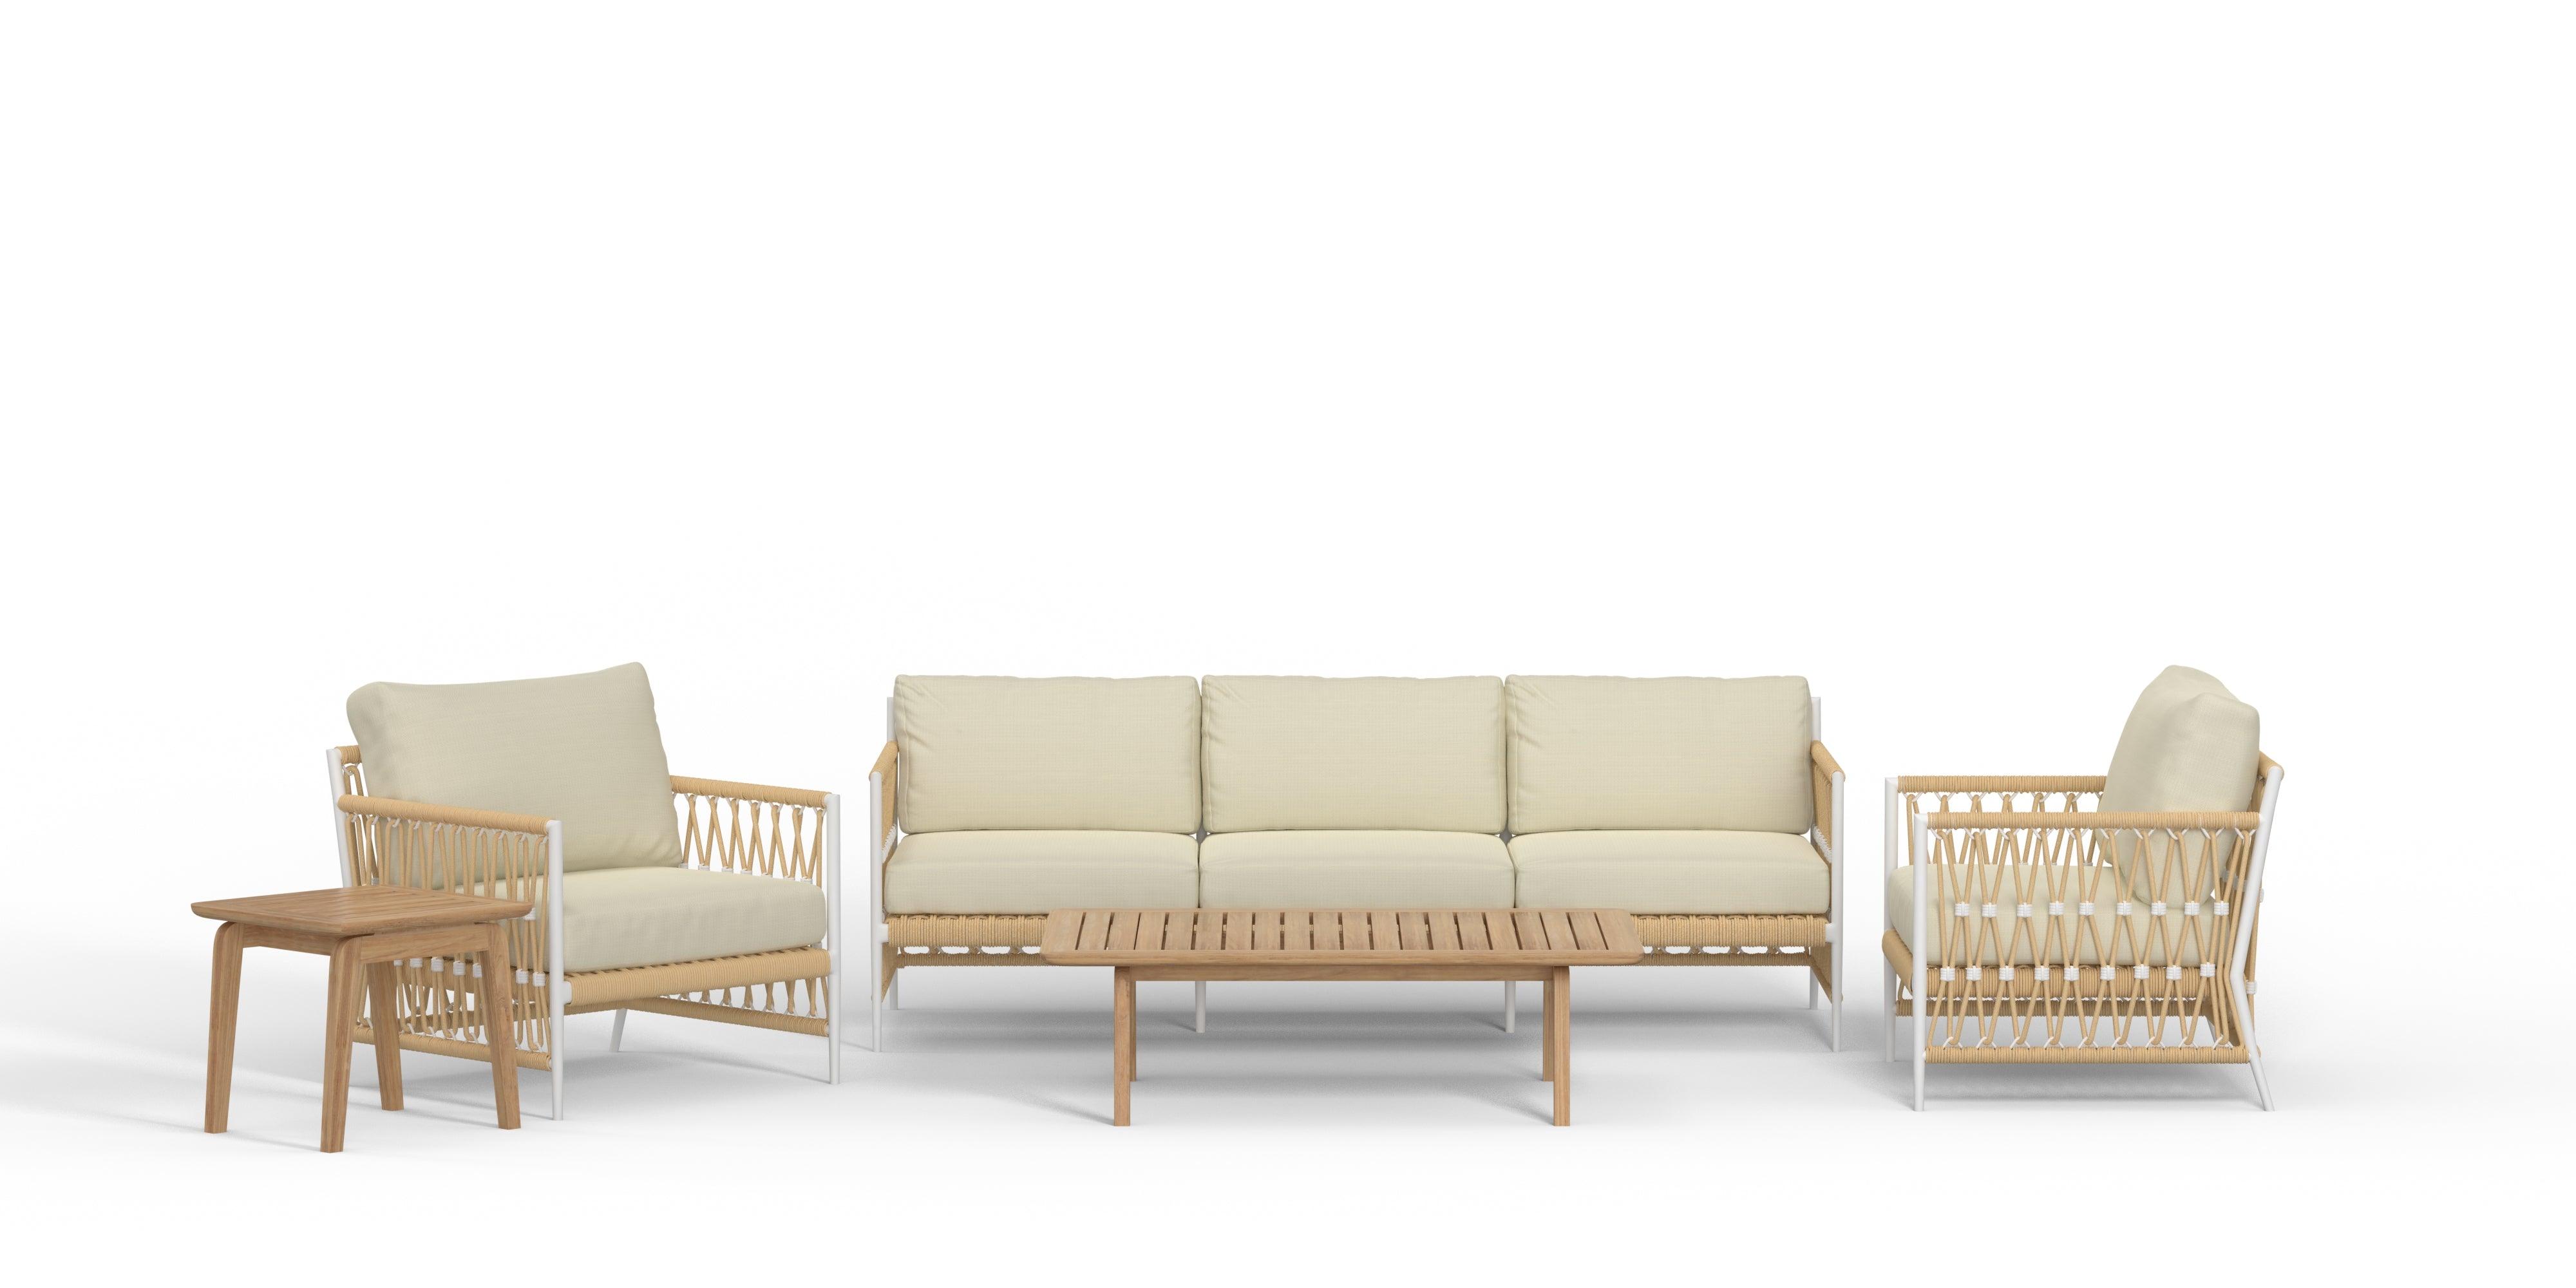 Rope Patio Furniture from Harbor Classic